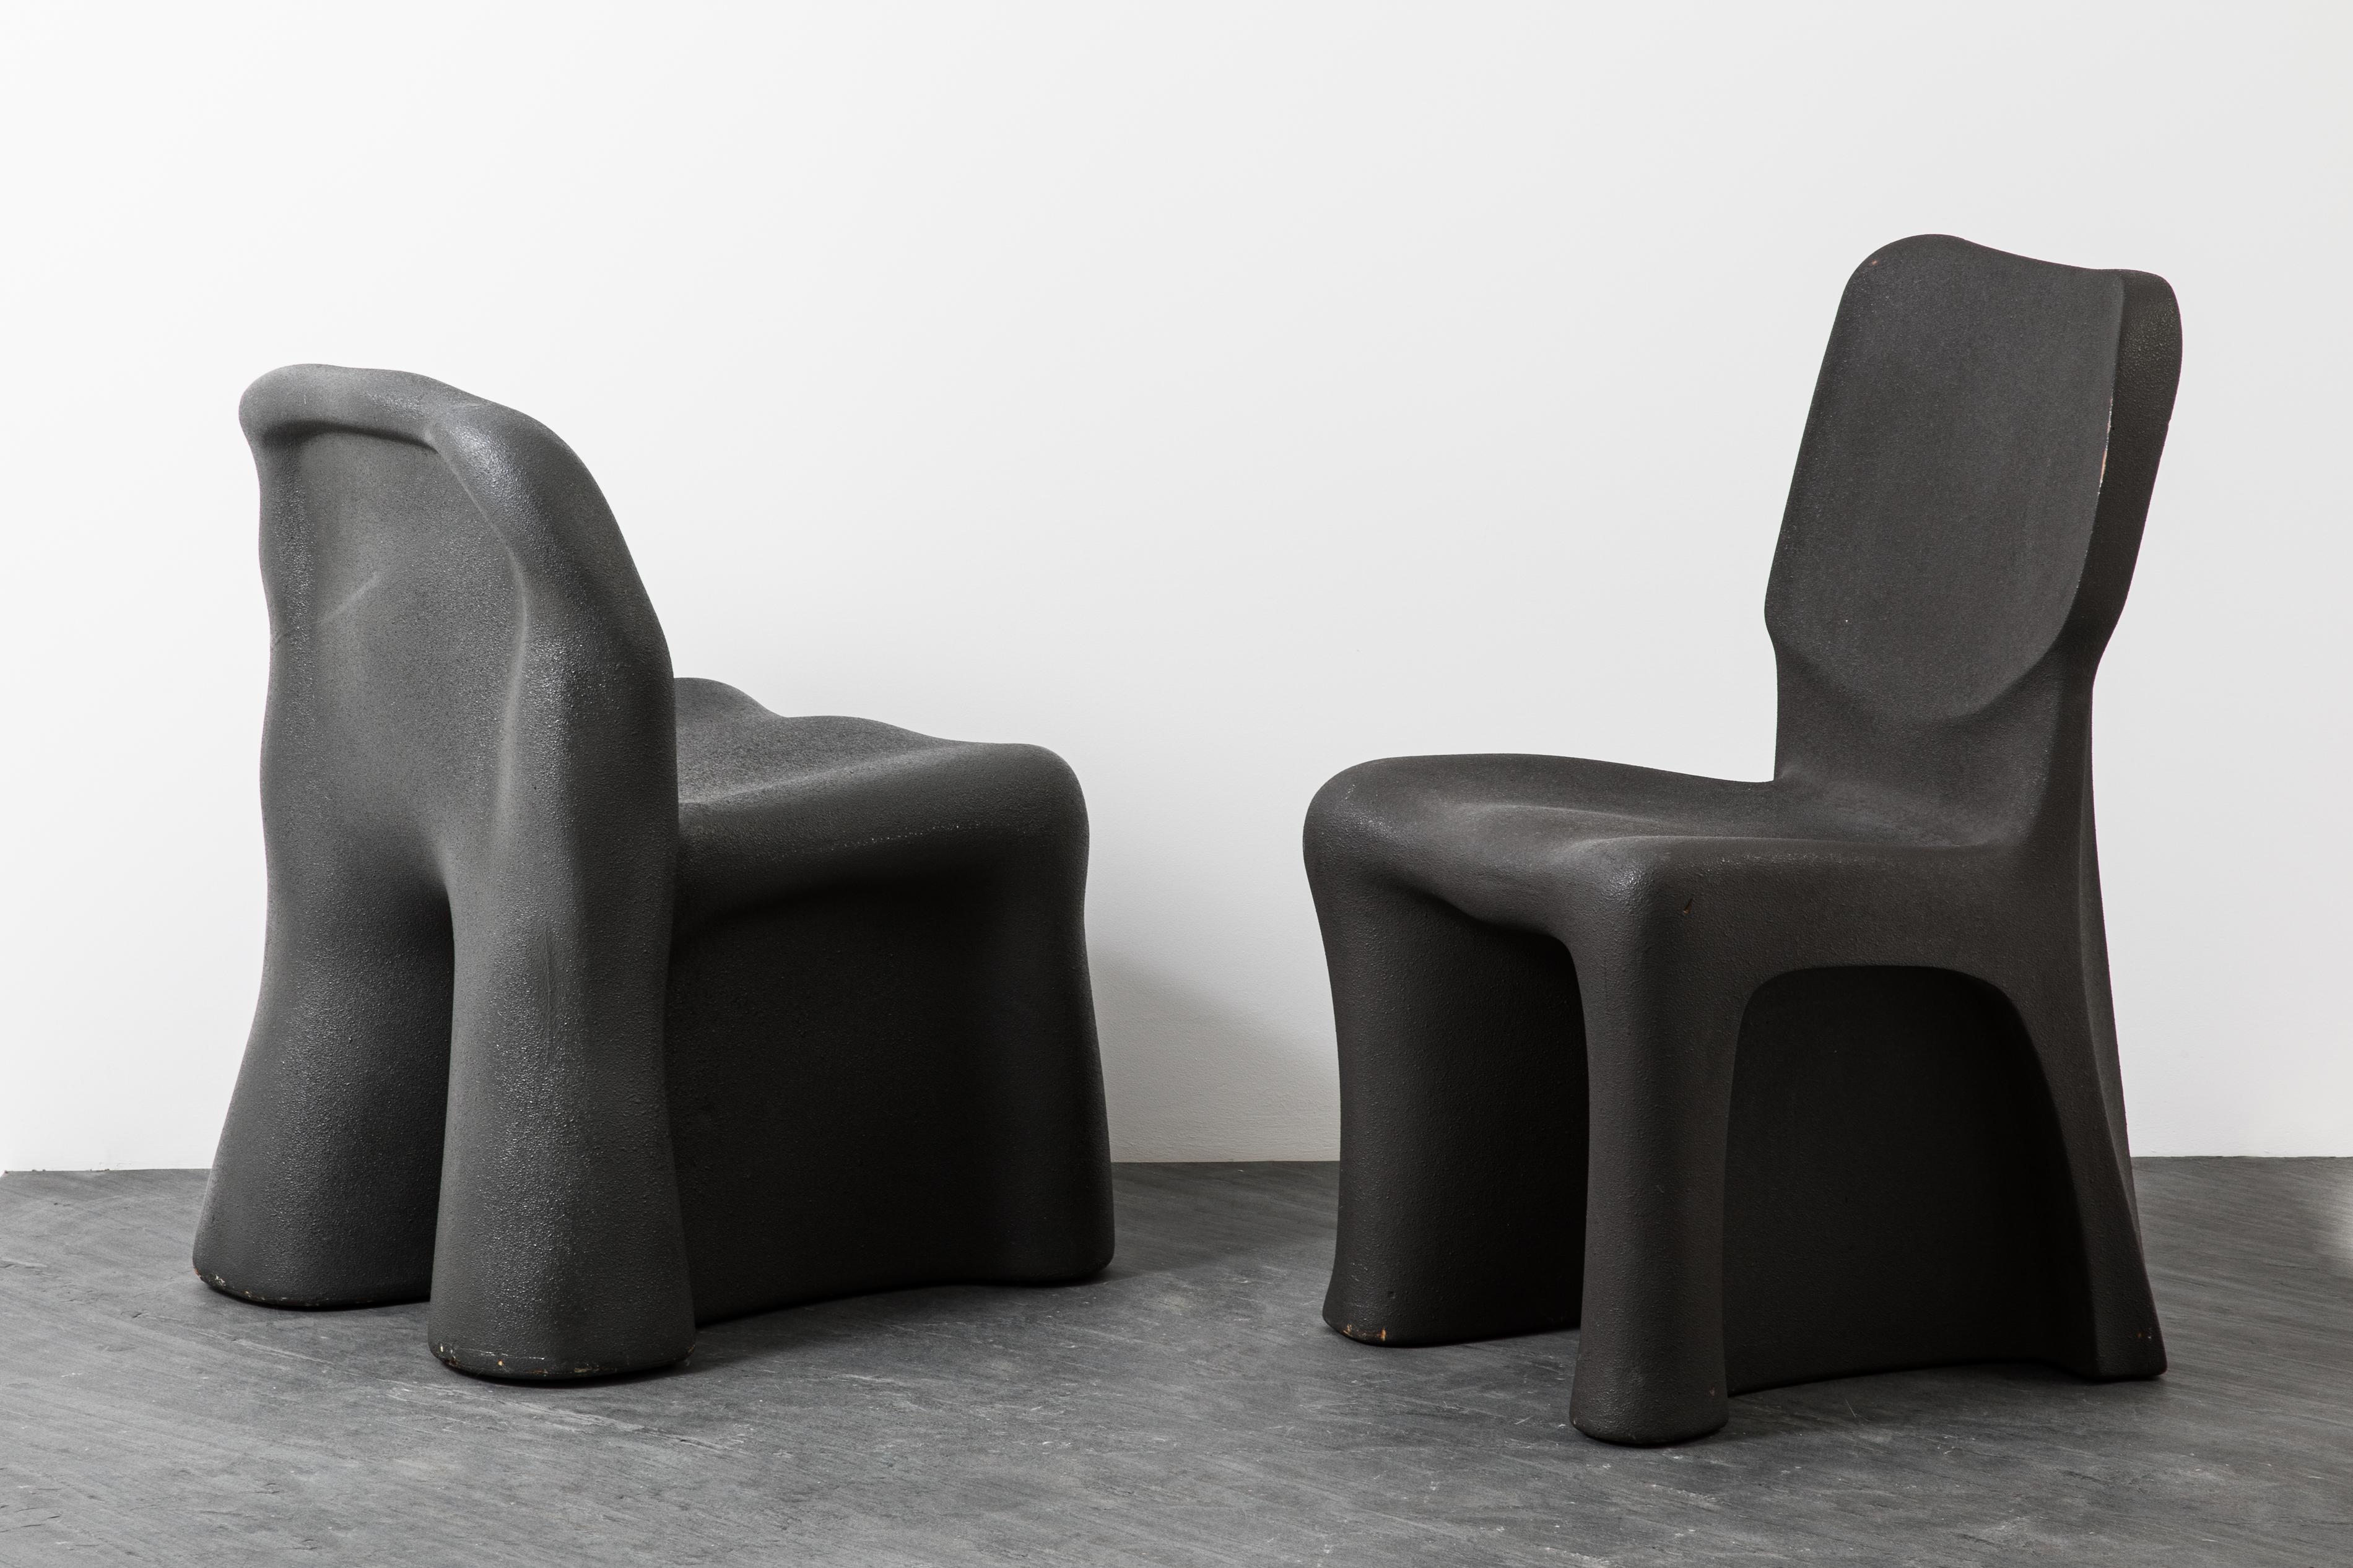 Italian 1980s Dalila Due pair of chairs by Gaetano Pesce For Sale